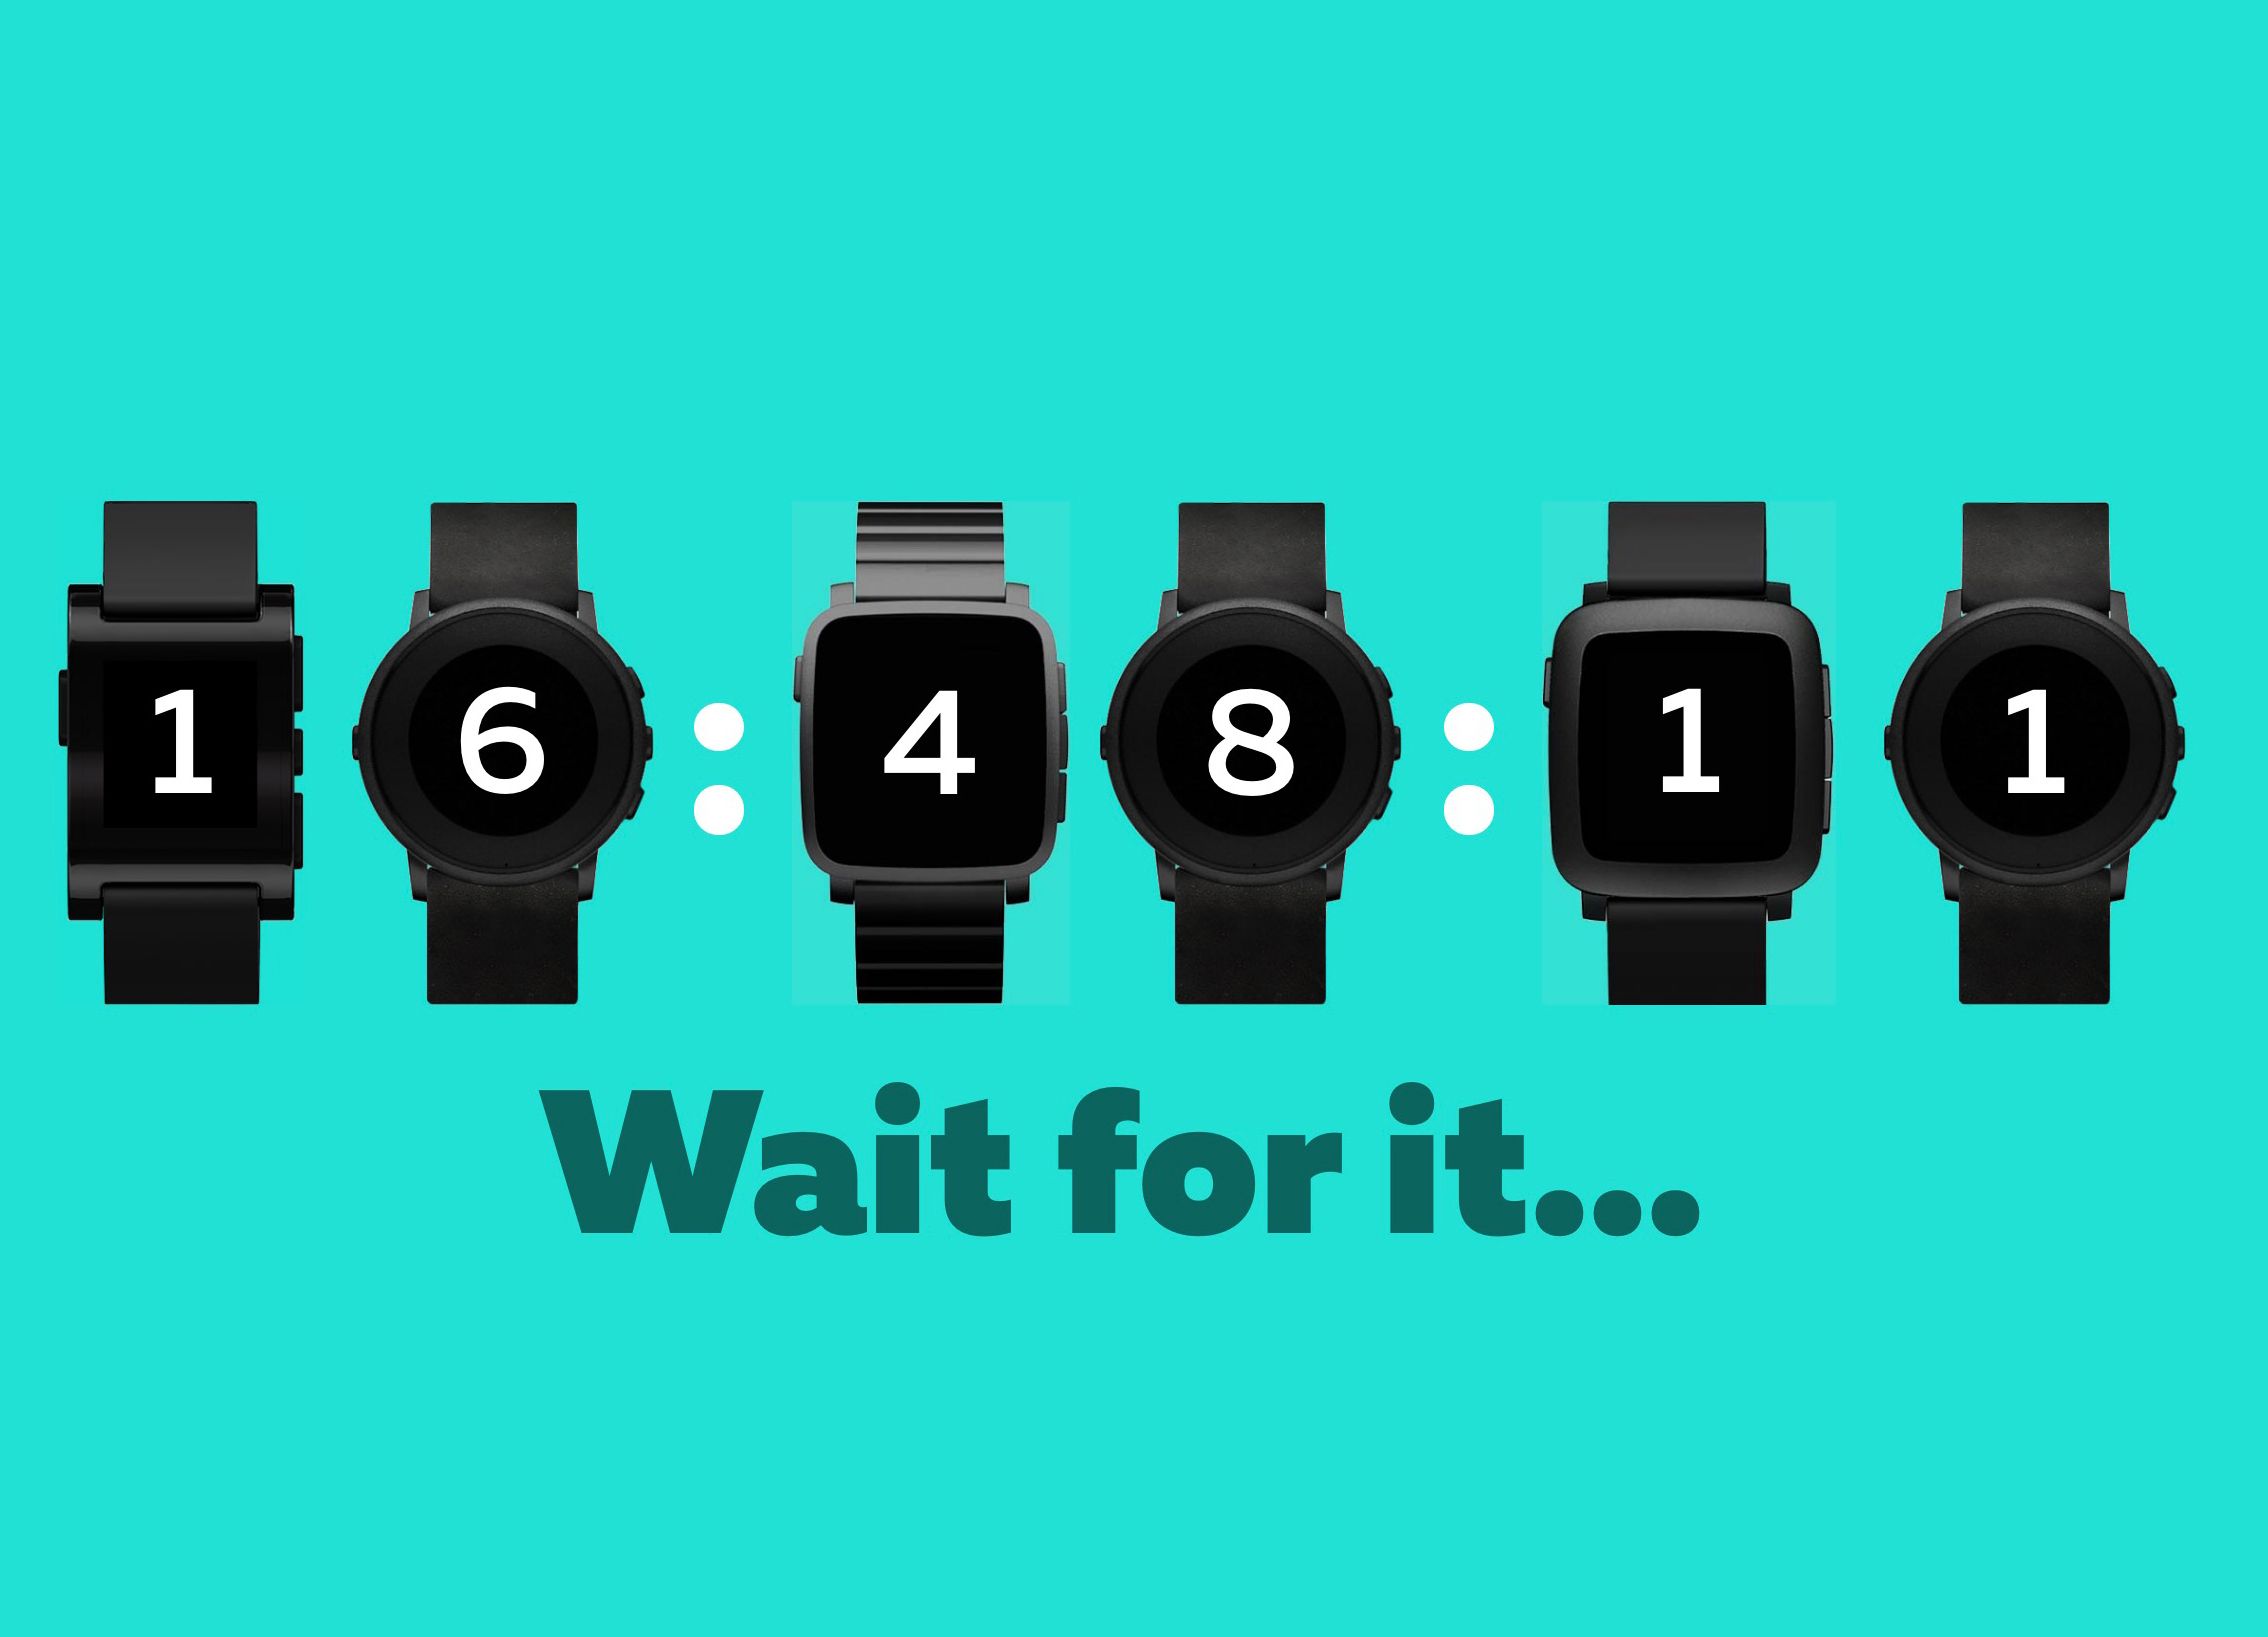 pebble is announcing something today what could it be  image 1